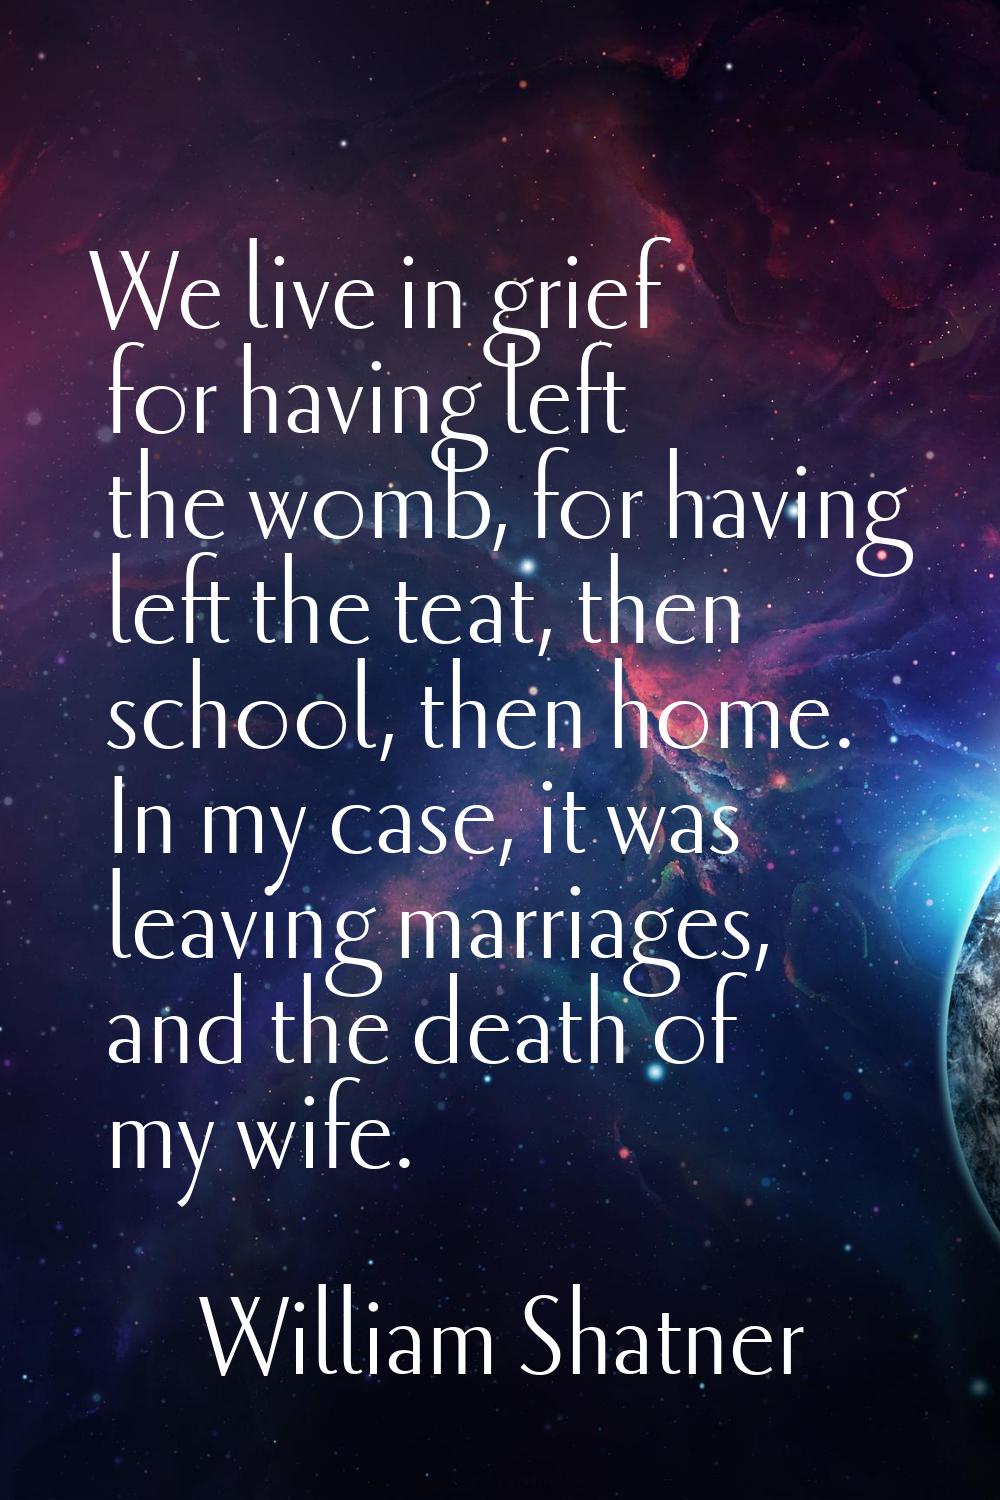 We live in grief for having left the womb, for having left the teat, then school, then home. In my 